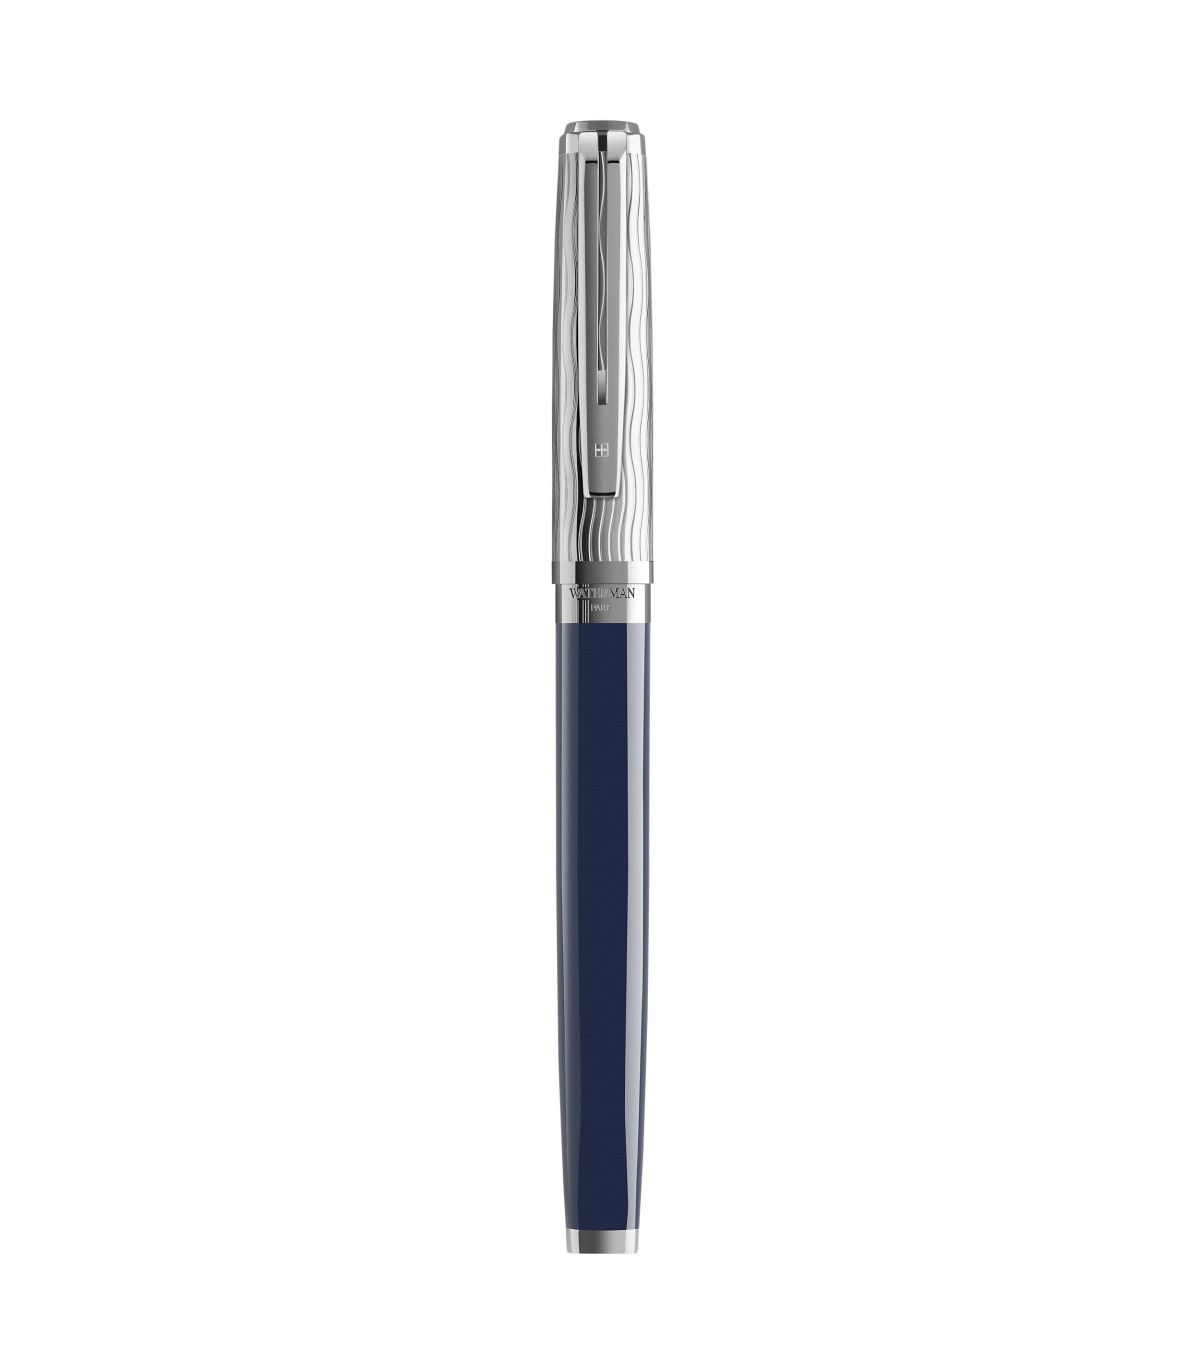  Waterman Expert Fountain Pen, Metal & Blue Lacquer, Chiselled  Cap, Stainless Steel Fine Nib, Blue Ink